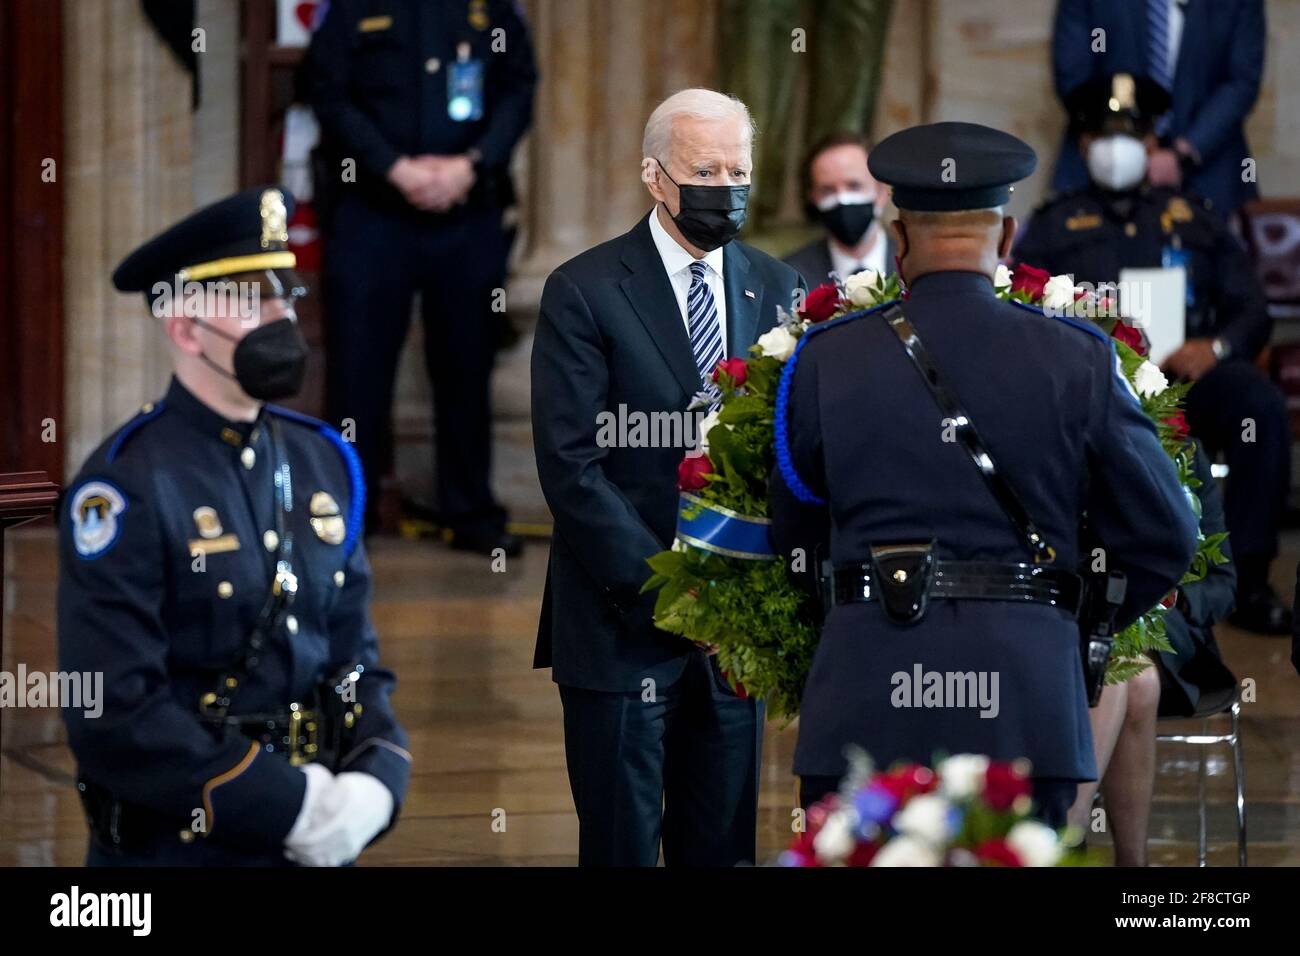 WASHINGTON, DC - APRIL 13: President Joe Biden pays his respects at the casket of the late U.S. Capitol Police officer William 'Billy' Evans during a memorial service as Evans lies in honor in the Rotunda at the U.S. Capitol on April 13, 2021 in Washington, DC. Officer Evans was killed in the line of duty during the attack outside the U.S. Capitol on April 2. He is the sixth Capitol Police officer to die in the line of duty in the nearly 200 years since the force was created. (Photo by Drew Angerer/Pool/Sipa USA) Stock Photo